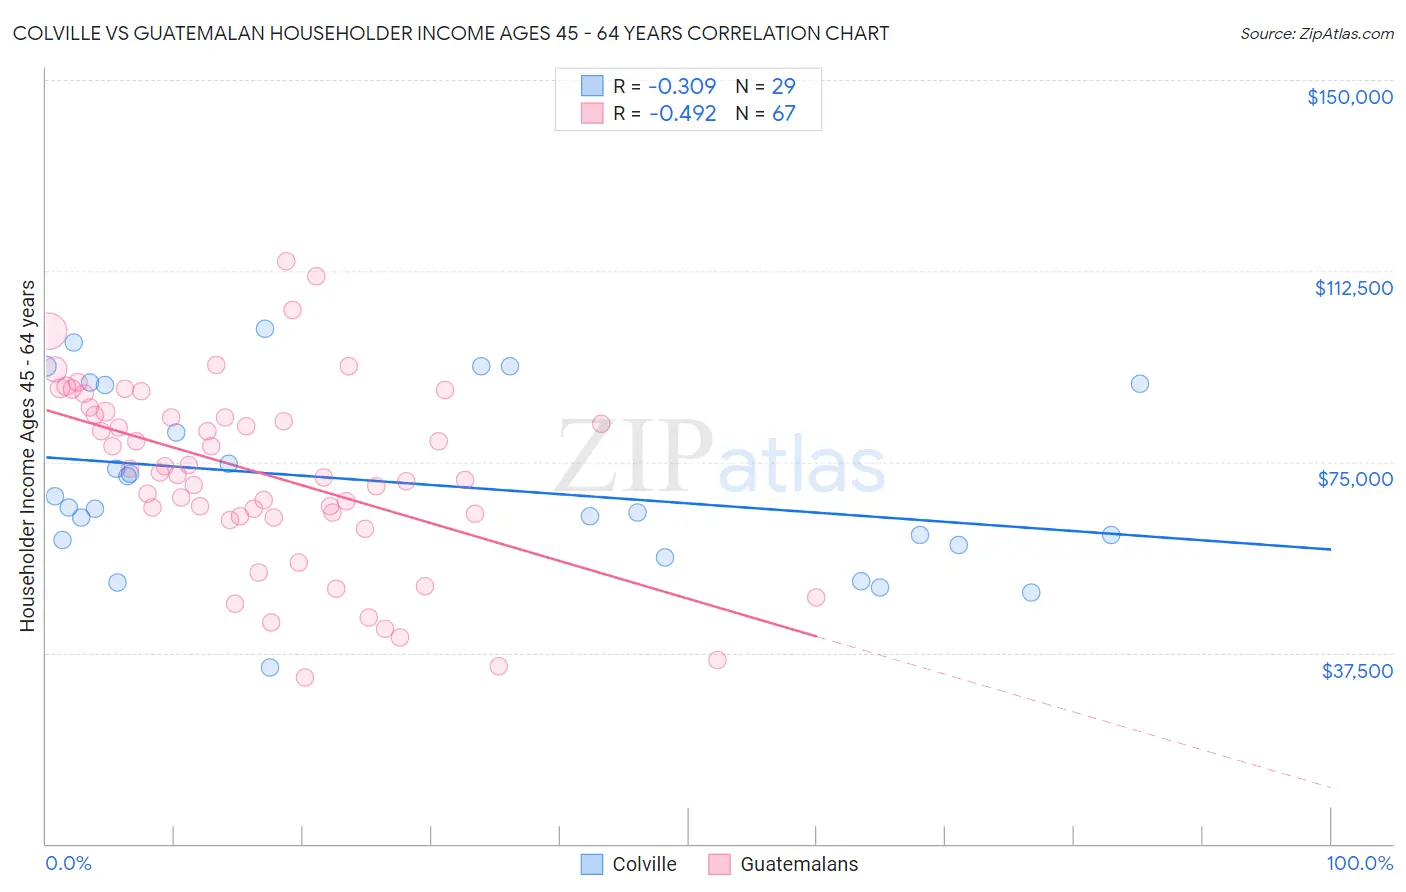 Colville vs Guatemalan Householder Income Ages 45 - 64 years